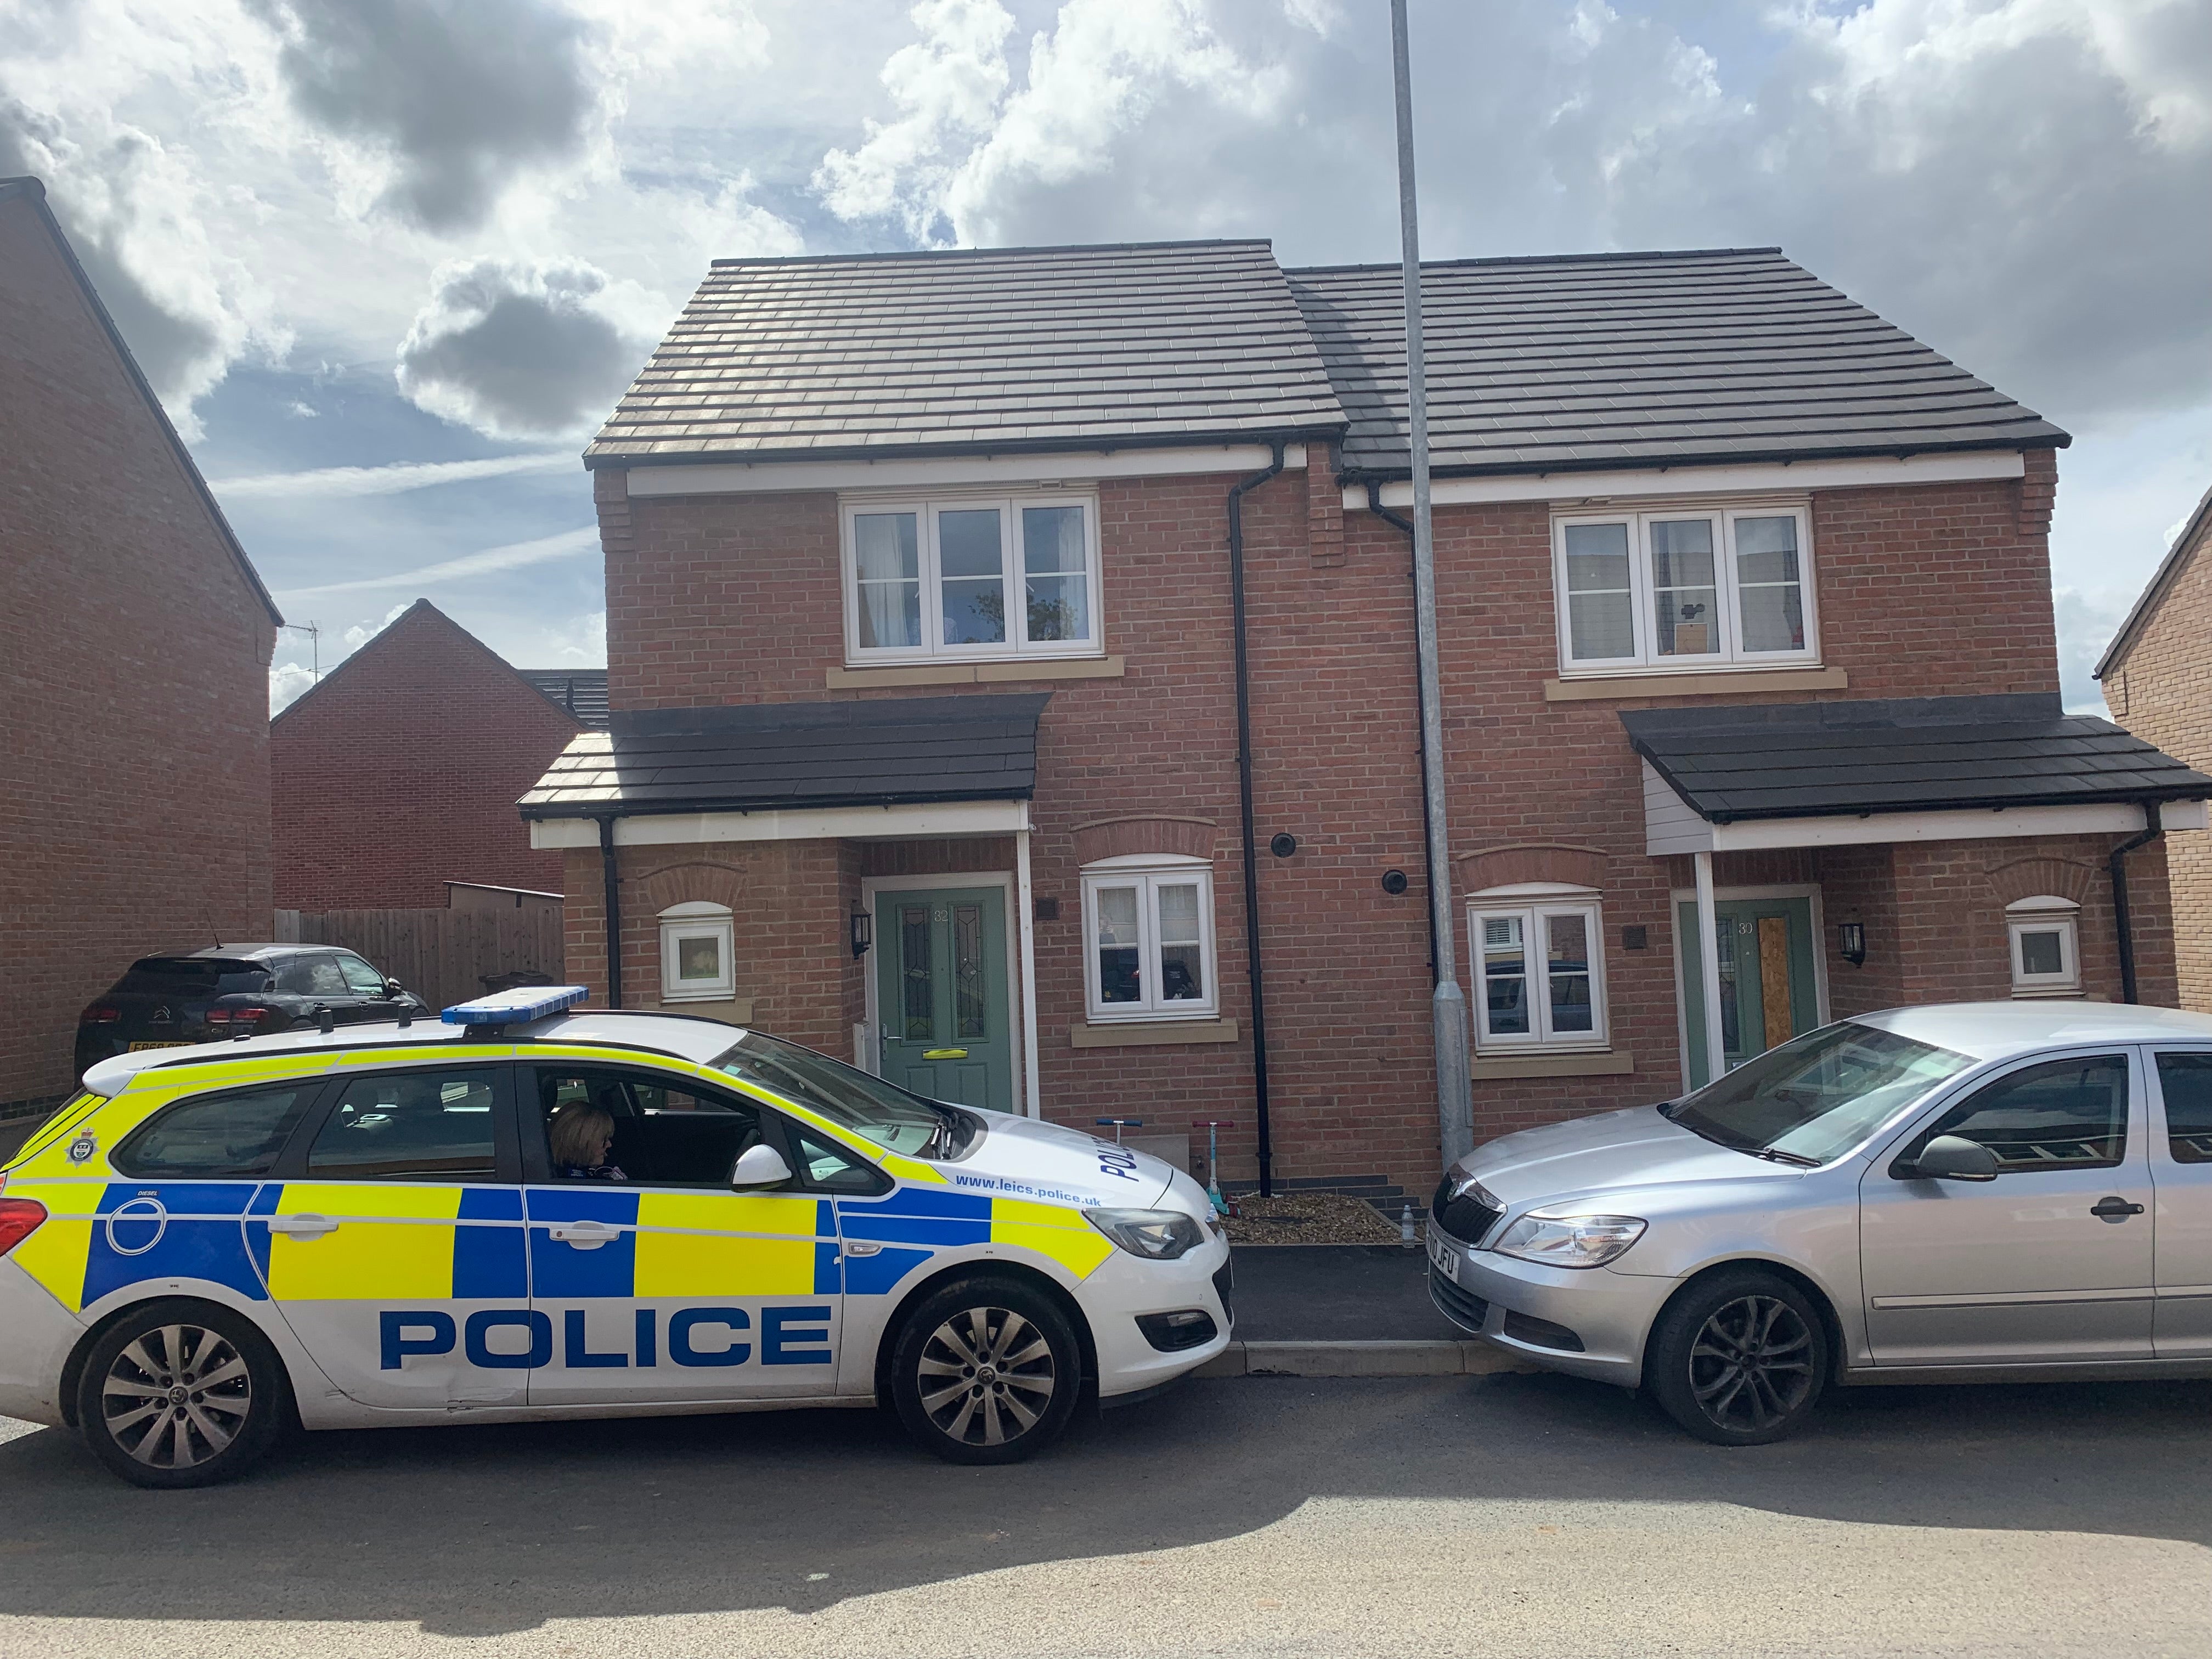 A marked police car outside a property in Field Edge Drive, Barrow upon Soar (Josh Payne/PA)